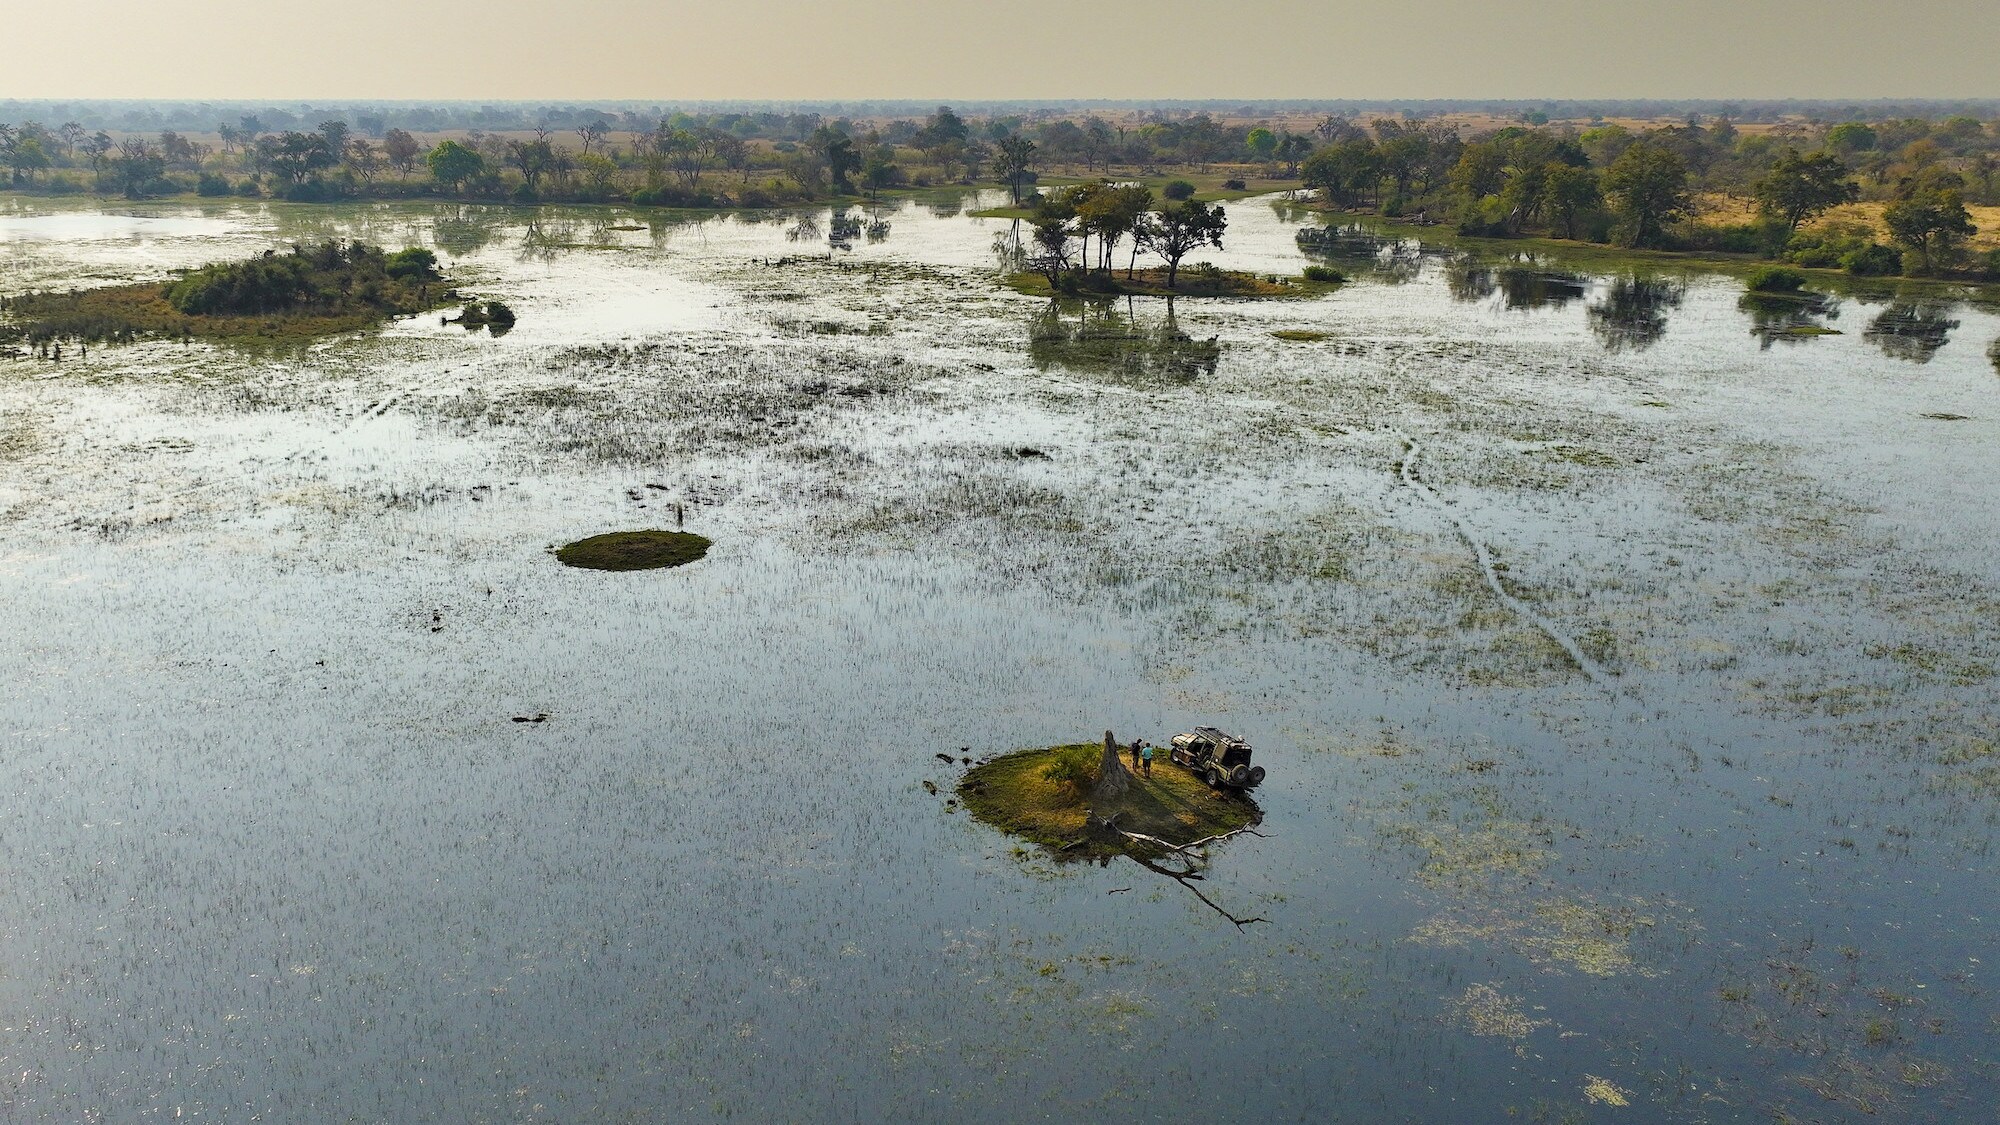 Aerial shot of the 4 wheel drive on a small 'island' surrounded by water. (National Geographic for Disney+/Bertie Gregory)